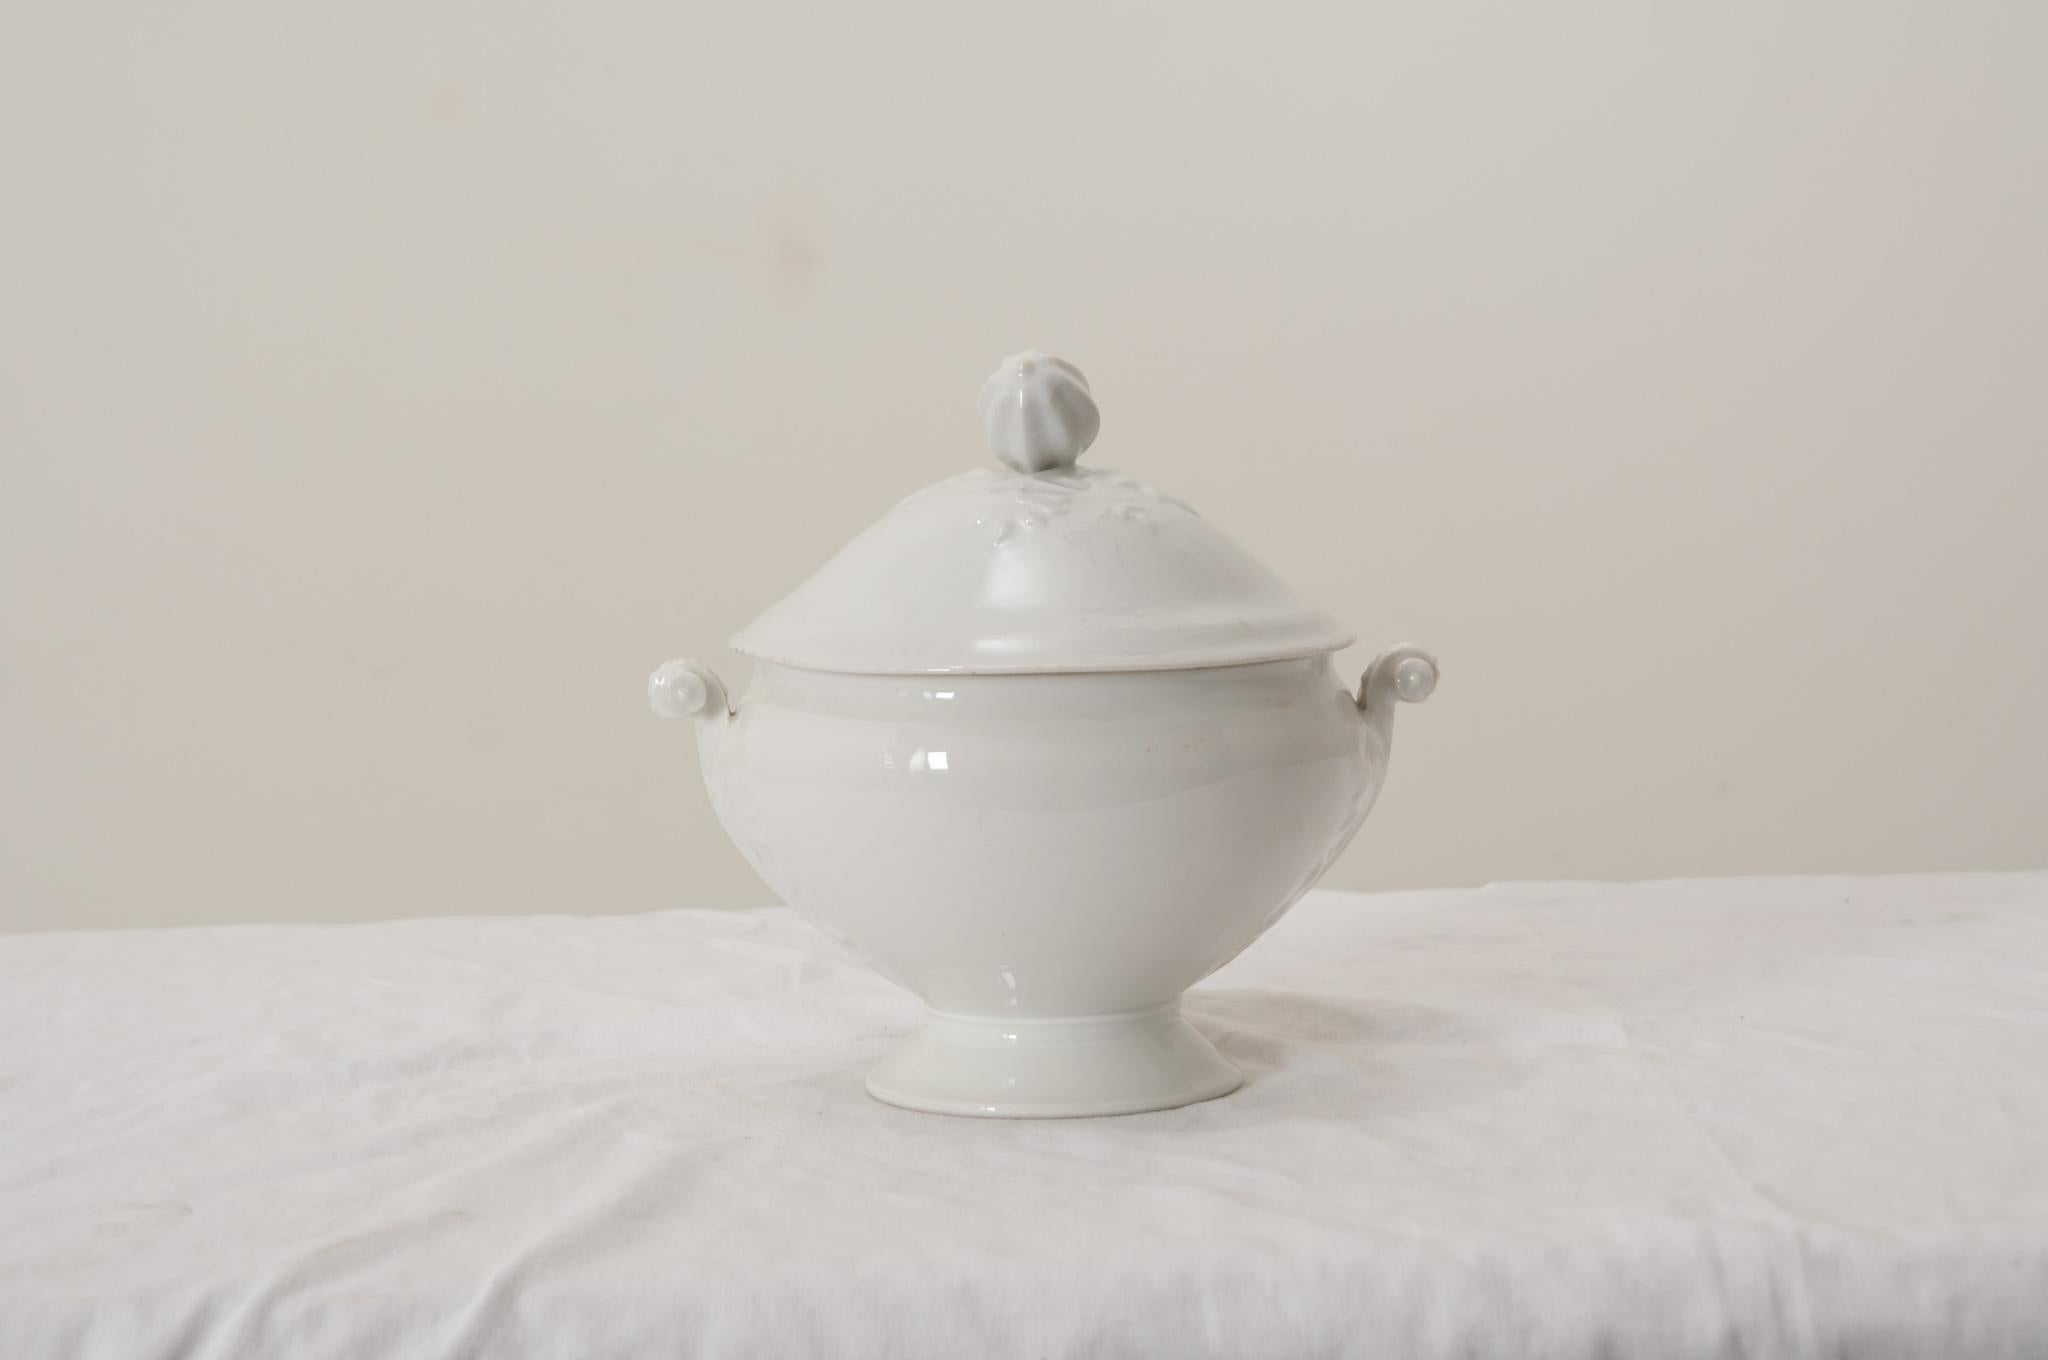 A gorgeous antique French white porcelain lidded soup tureen with pedestal base, perfect for serving soups, stews, and gumbos.This fine soup tureen has a decorative acorn squash finial on the lid, lovely ornate scrolling handles, foliate motifs on